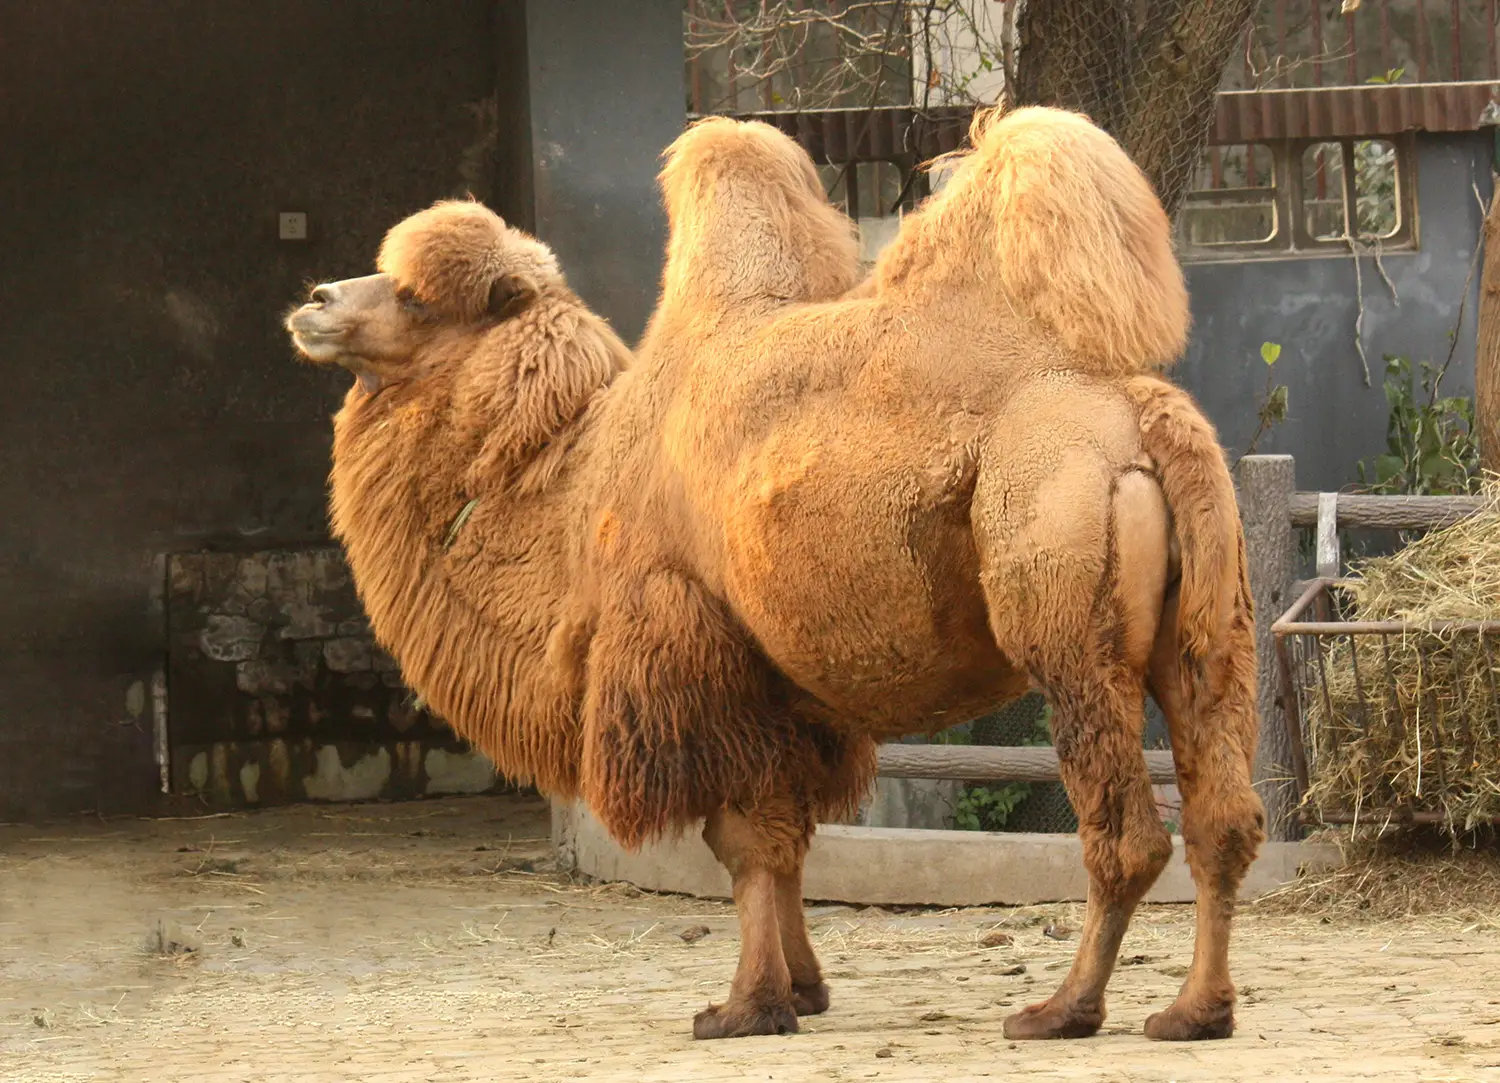 A camel with two humps. 